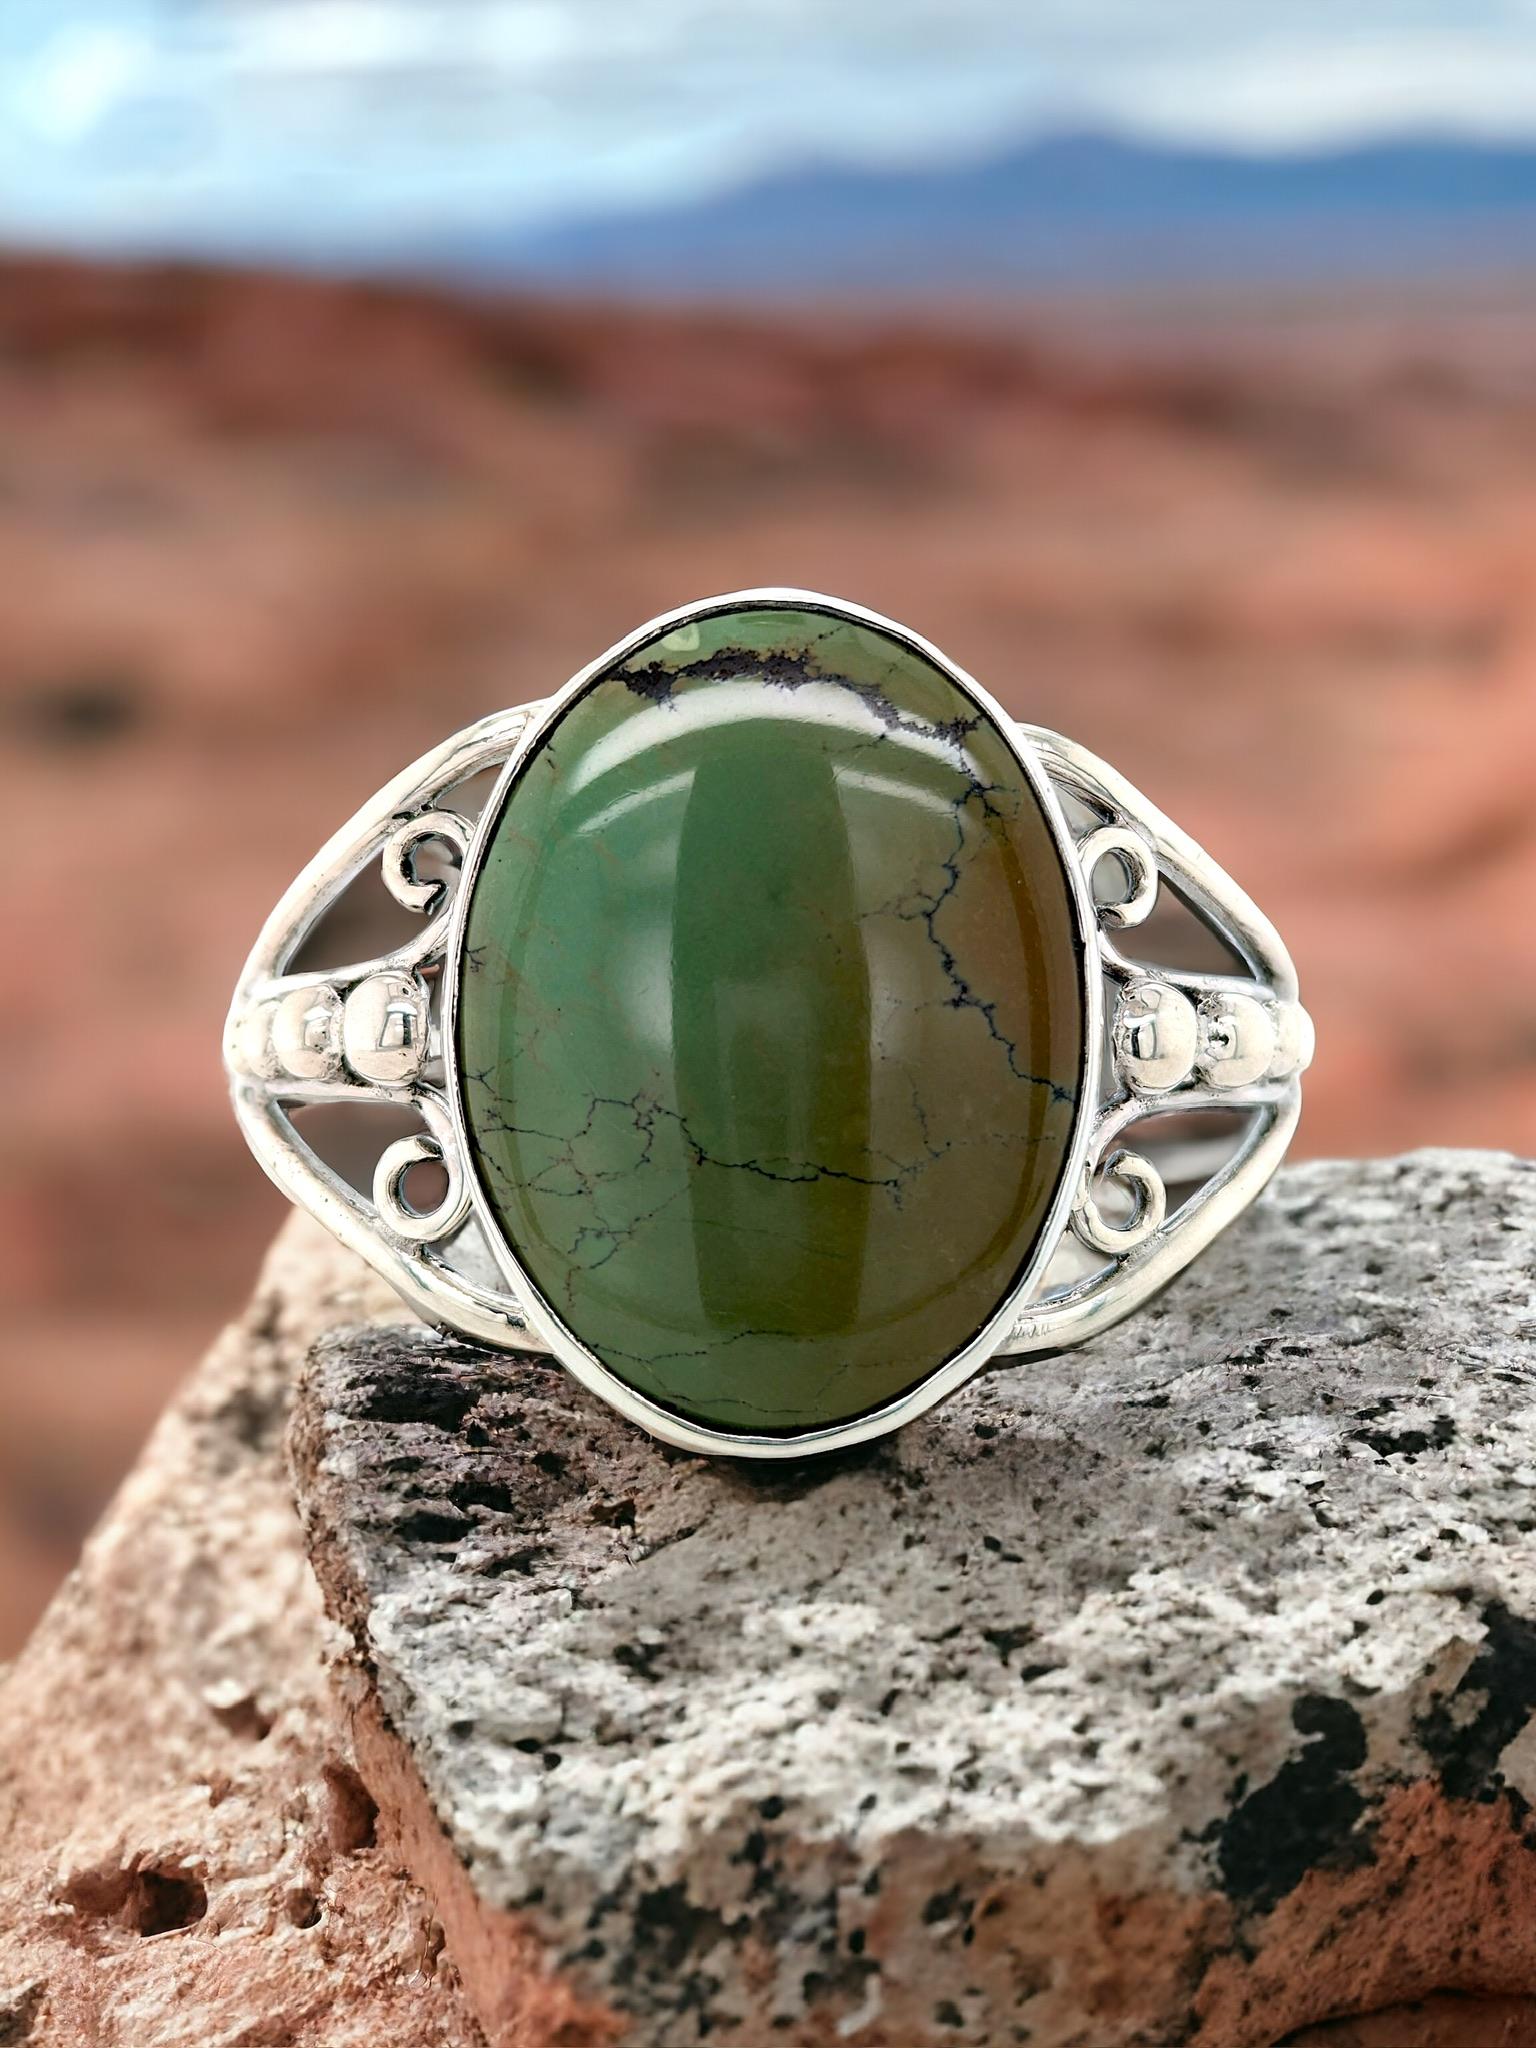 This Bold Green Cuff Bracelet will definitely turn heads. Featuring a captivating green gemstone, this stunning piece is crafted from gleaming Sterling Silver and is ideal for adding a touch of rugged elegance to any outfit.

Unobtrusive Presence: